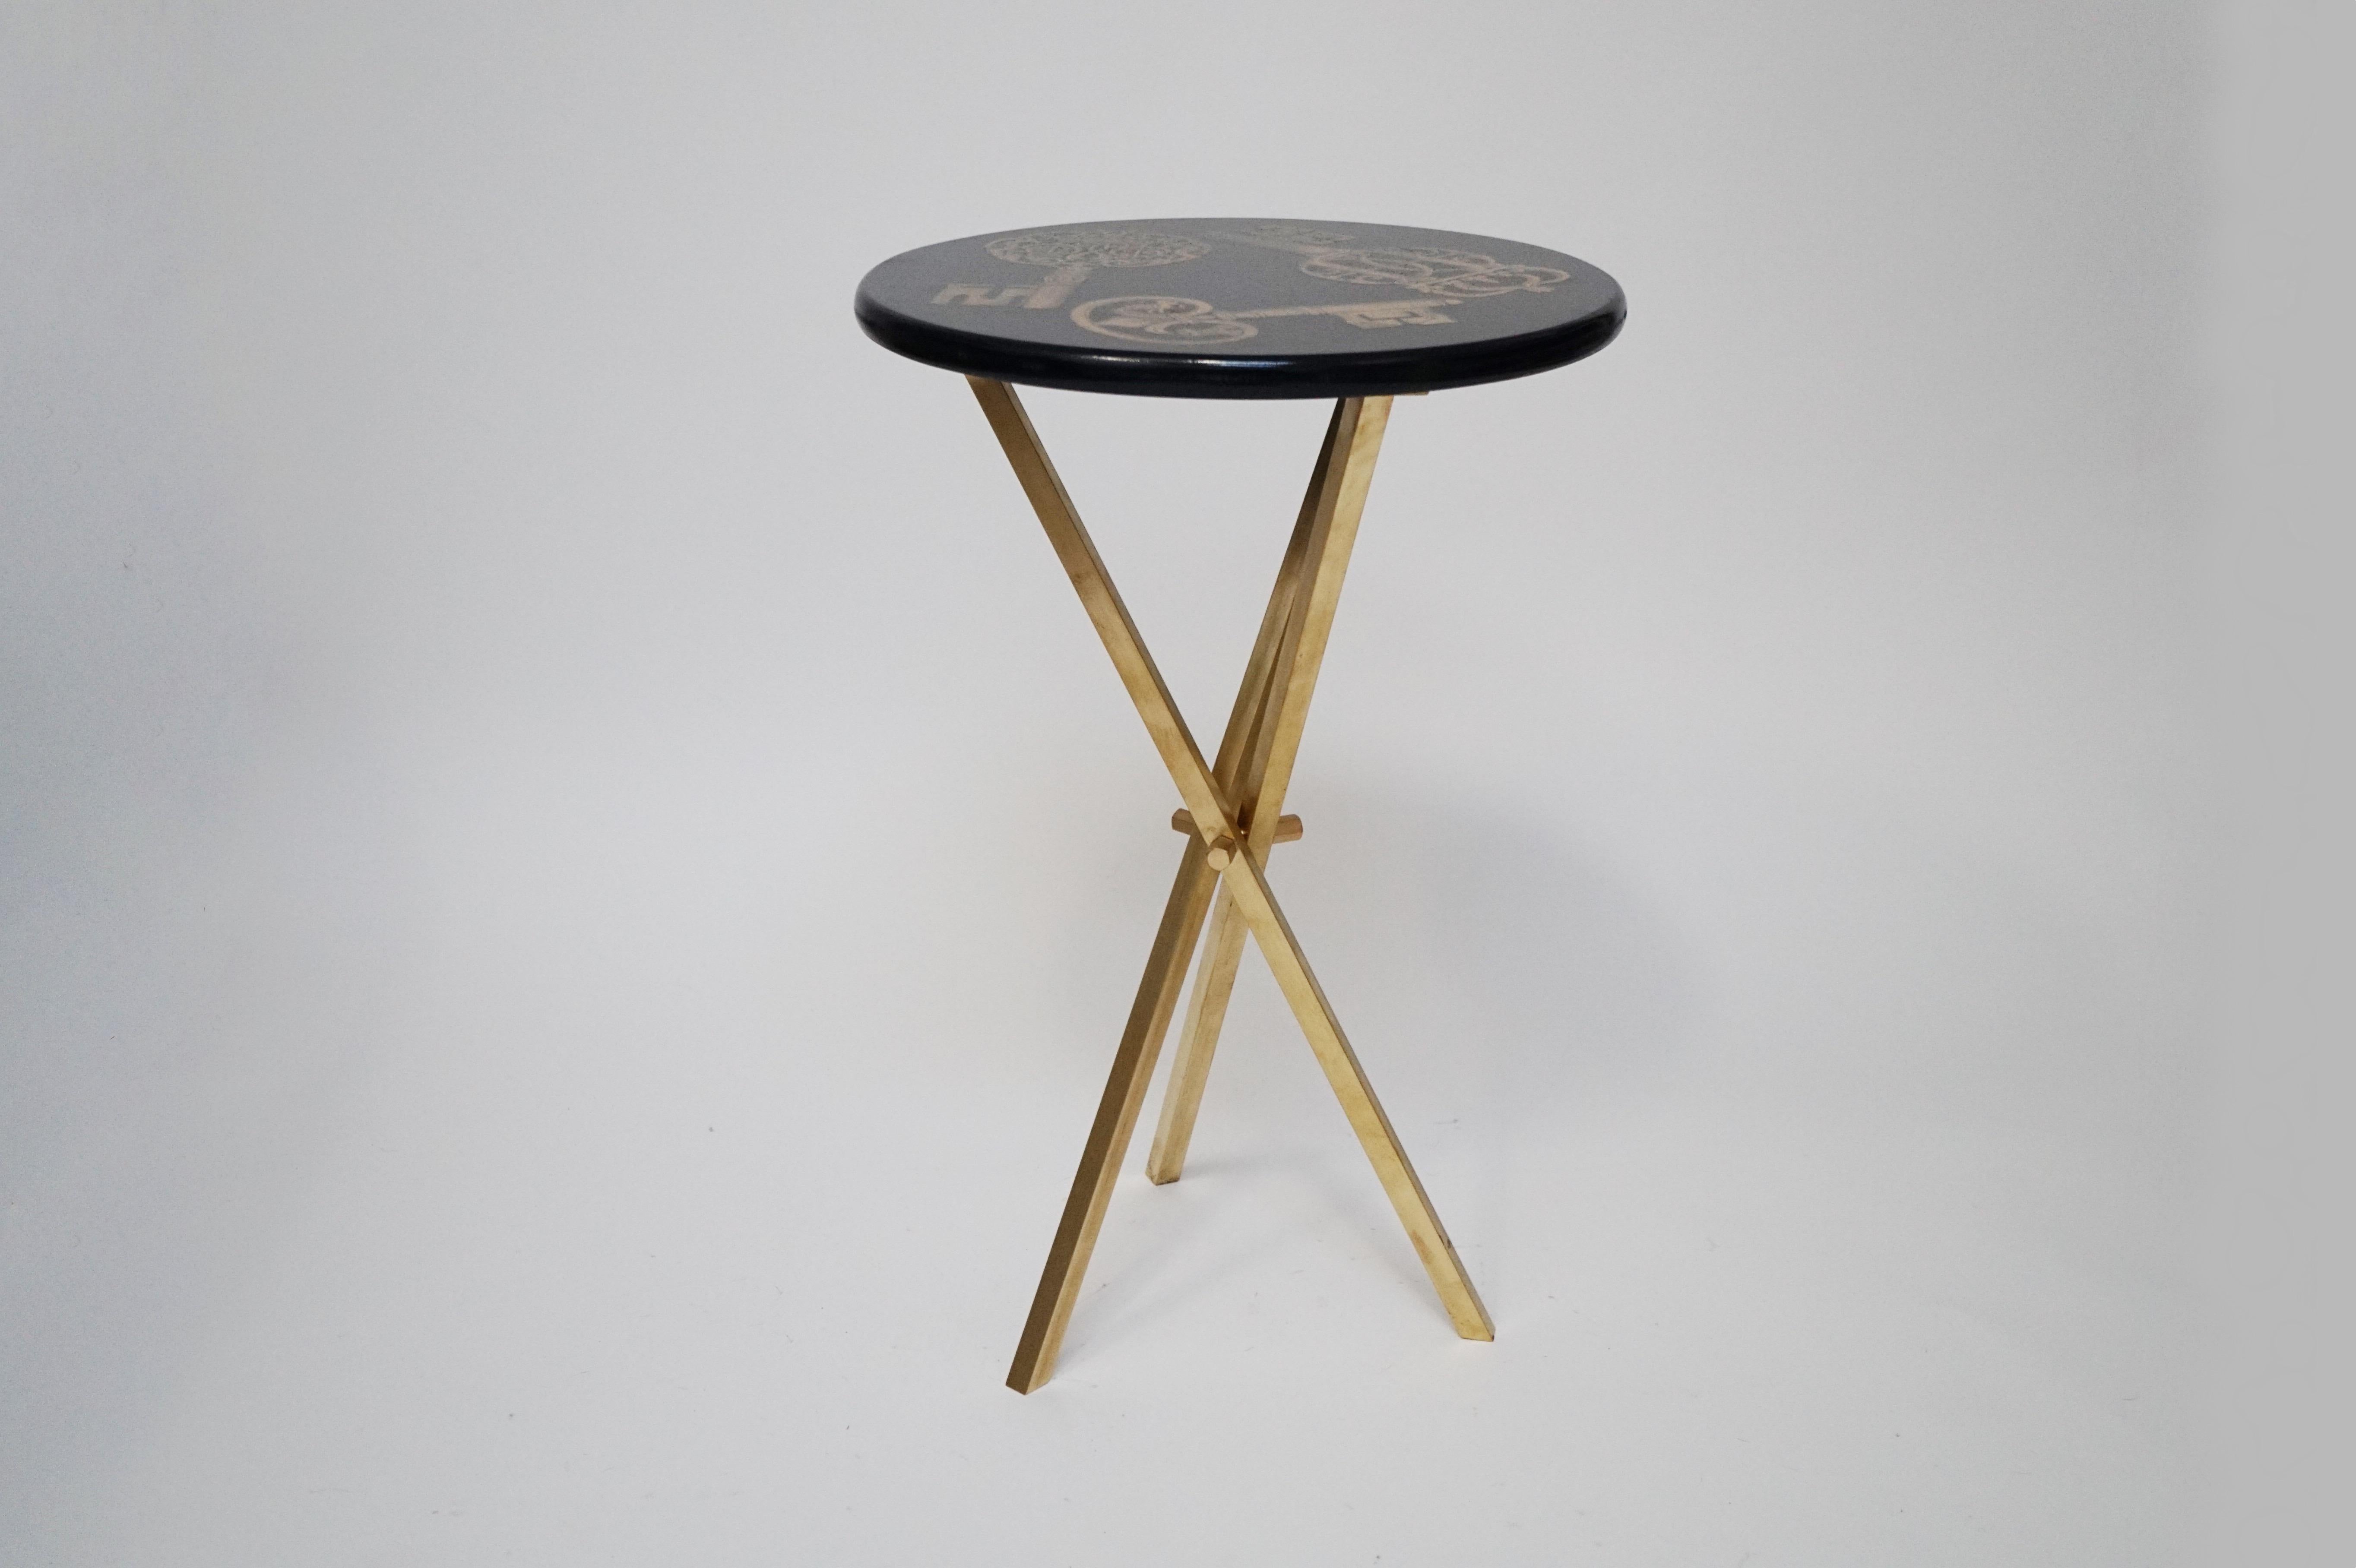 This rare collectors item is the 'Chiavi' side table by Piero Fornasetti, signed underneath with its original label. The side table is made with lacquered wood that has a black and gold 'keys' motif and is affixed on top of a brass tri-pod base that